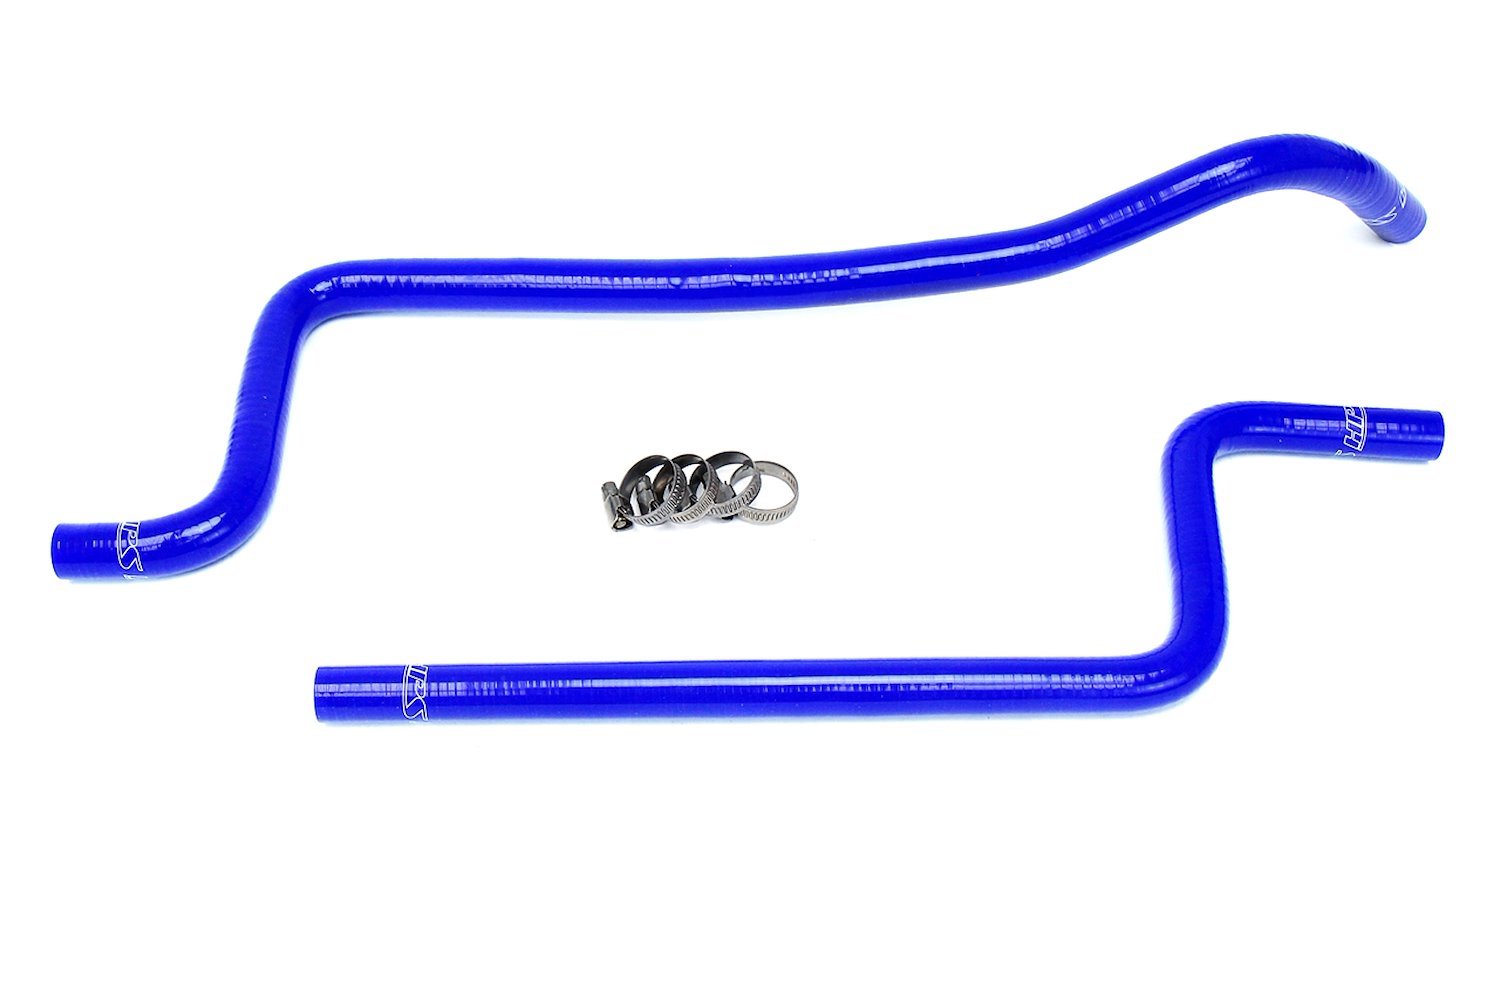 57-1221H-BLUE Heater Hose Kit, High-Temp 3-Ply Reinforced Silicone, Replace OEM Rubber Heater Coolant Hoses